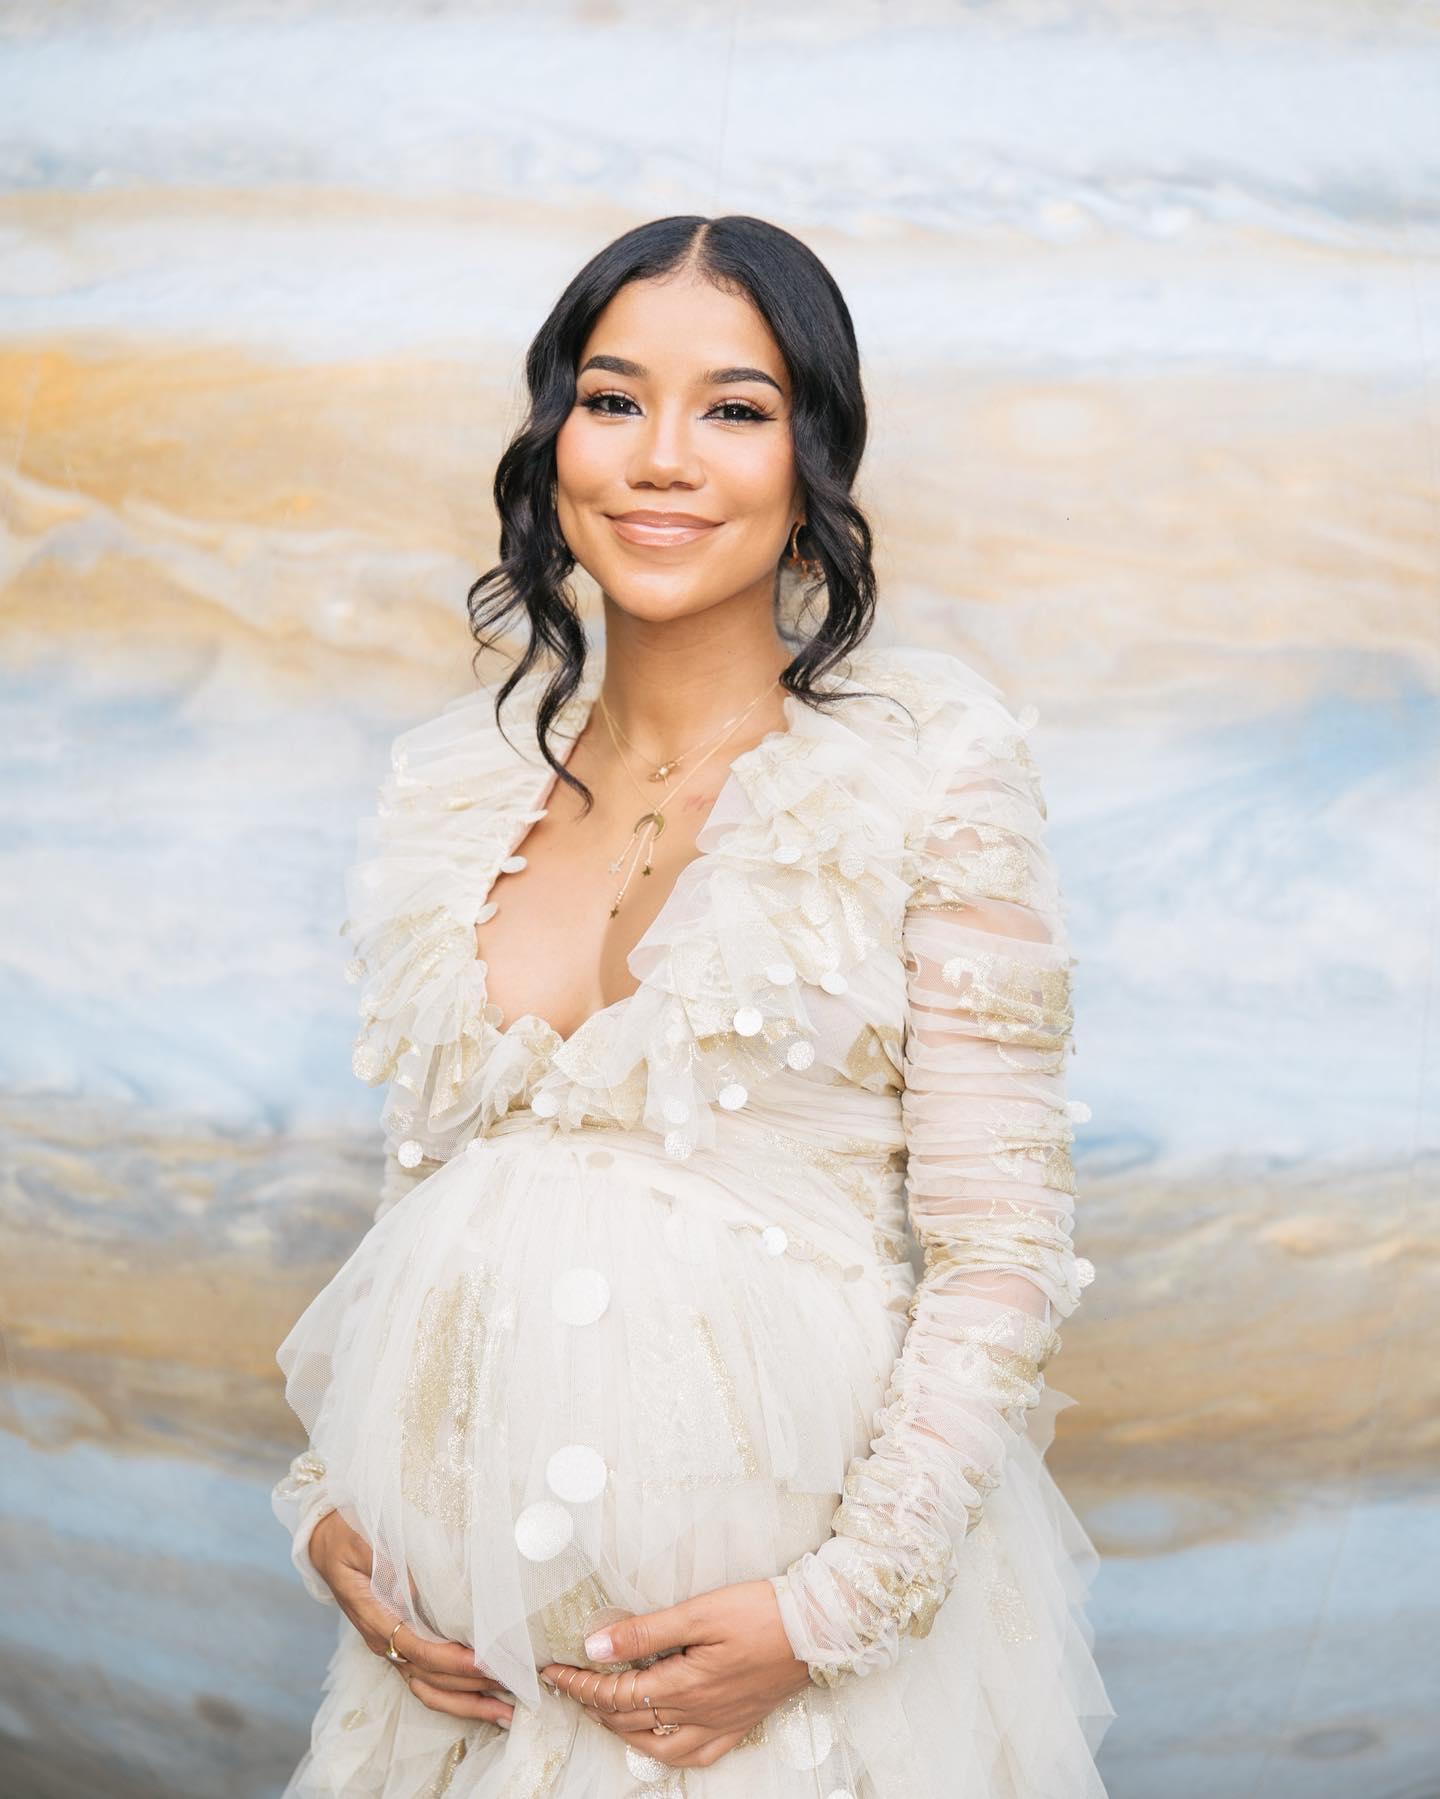 Big Sean And Jhené Aiko Welcome Their First Child Together